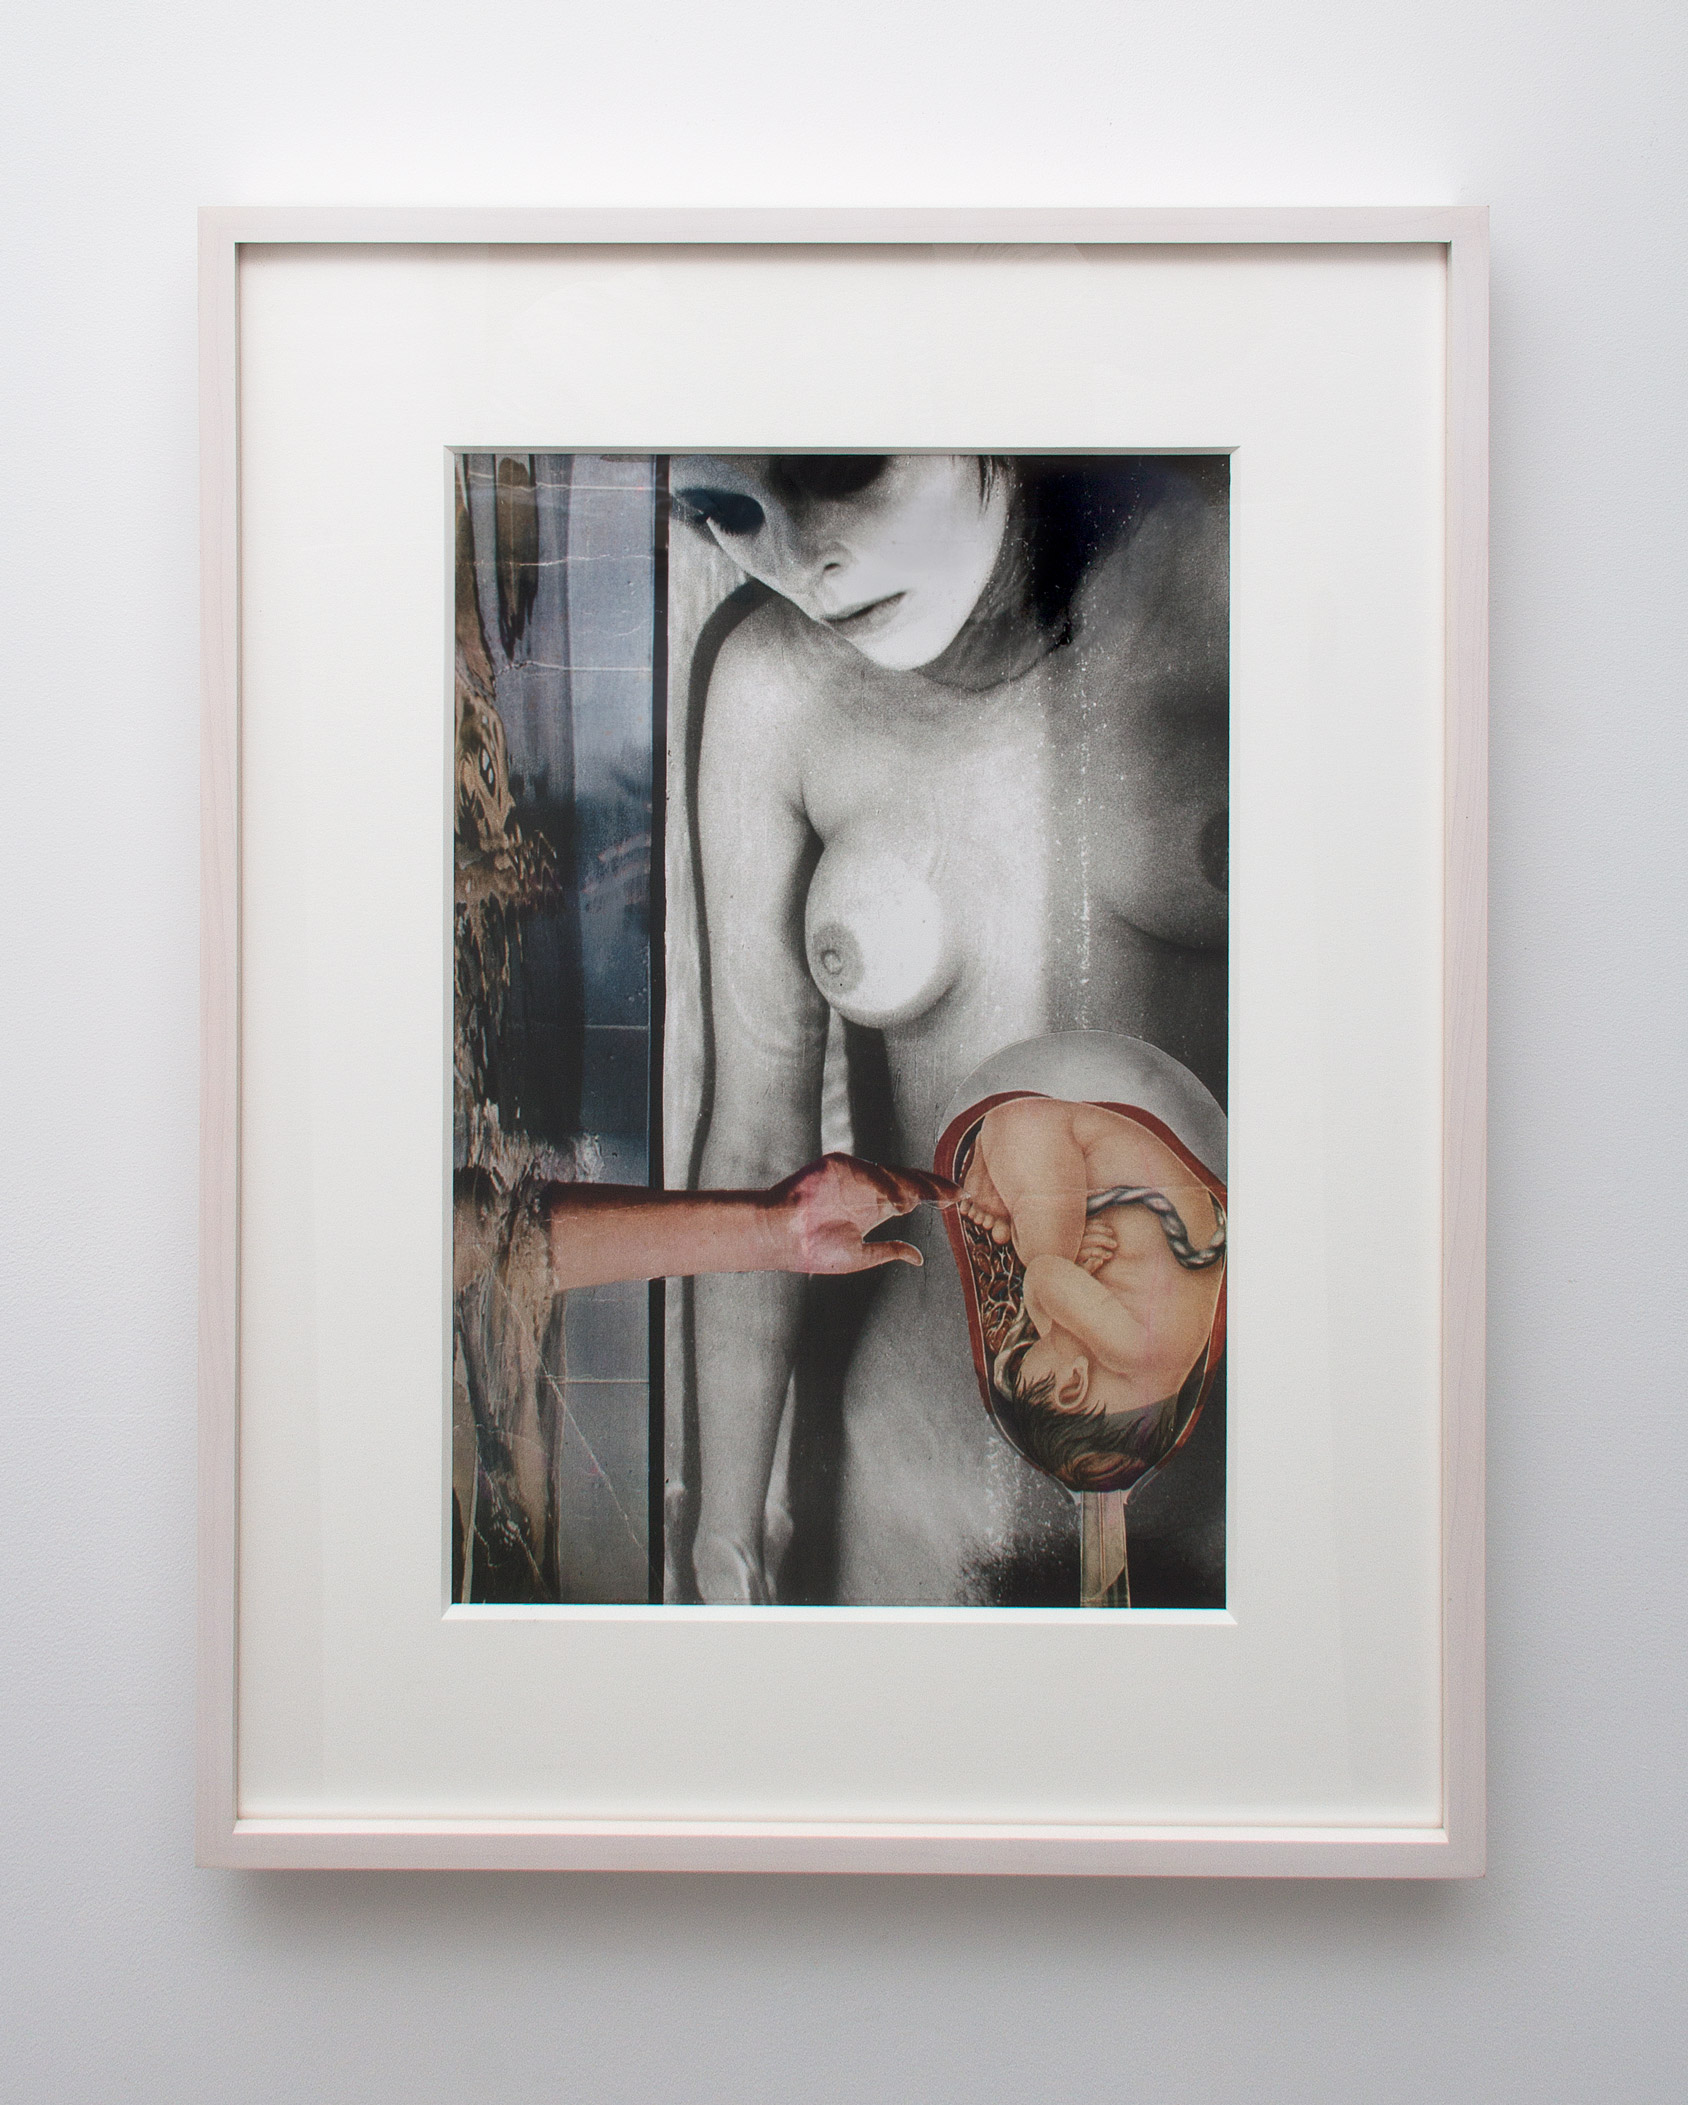 Penny Slinger, The Safe Period, 1969-2014, c-print from original collage, 16h x 10.63w in.